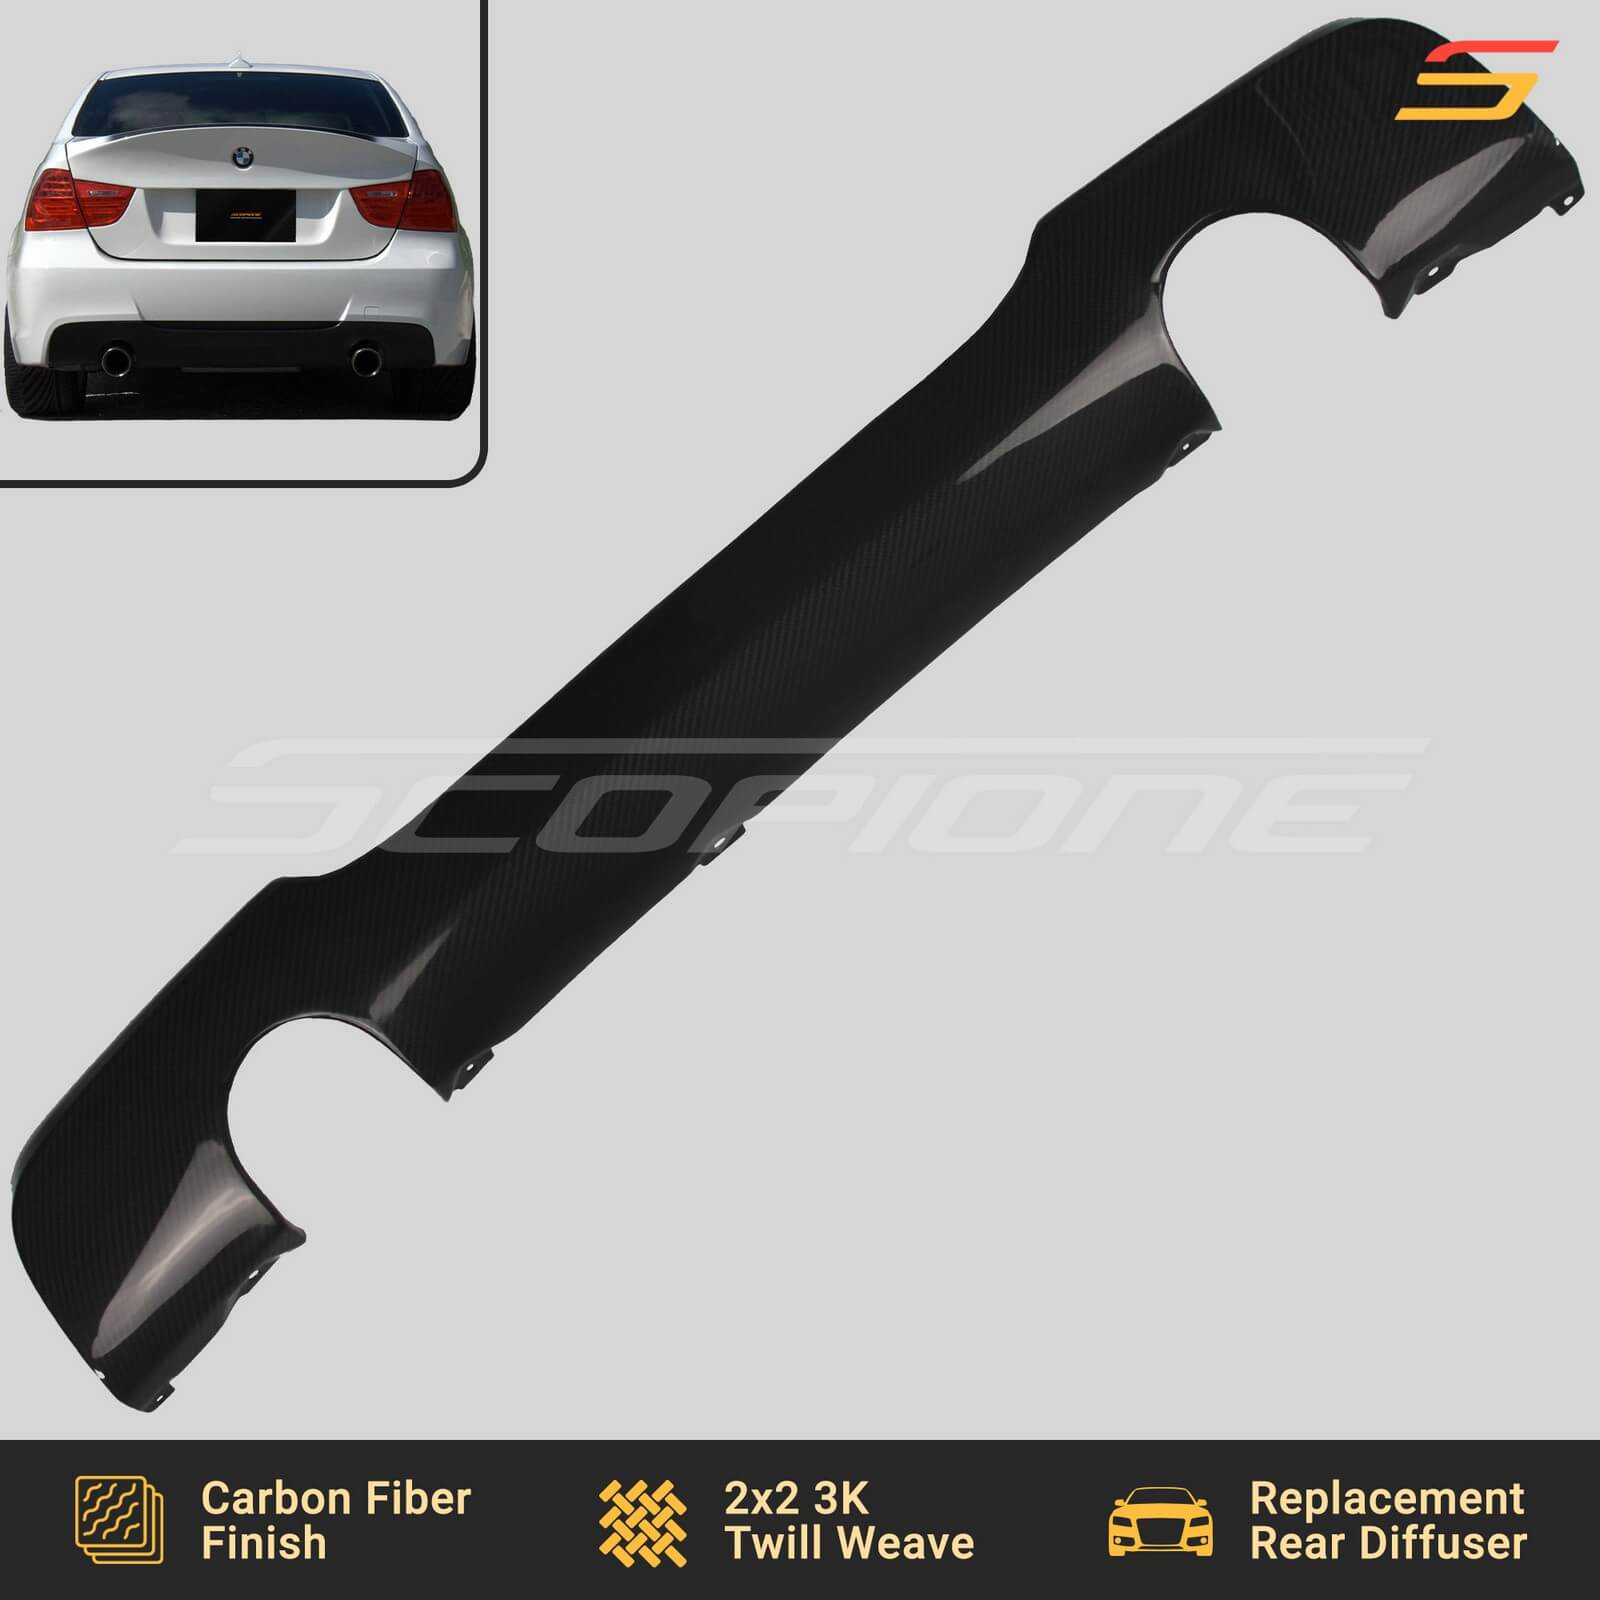  Cuztom Tuning Fits for 2006-2011 BMW E90 E91 3 Series